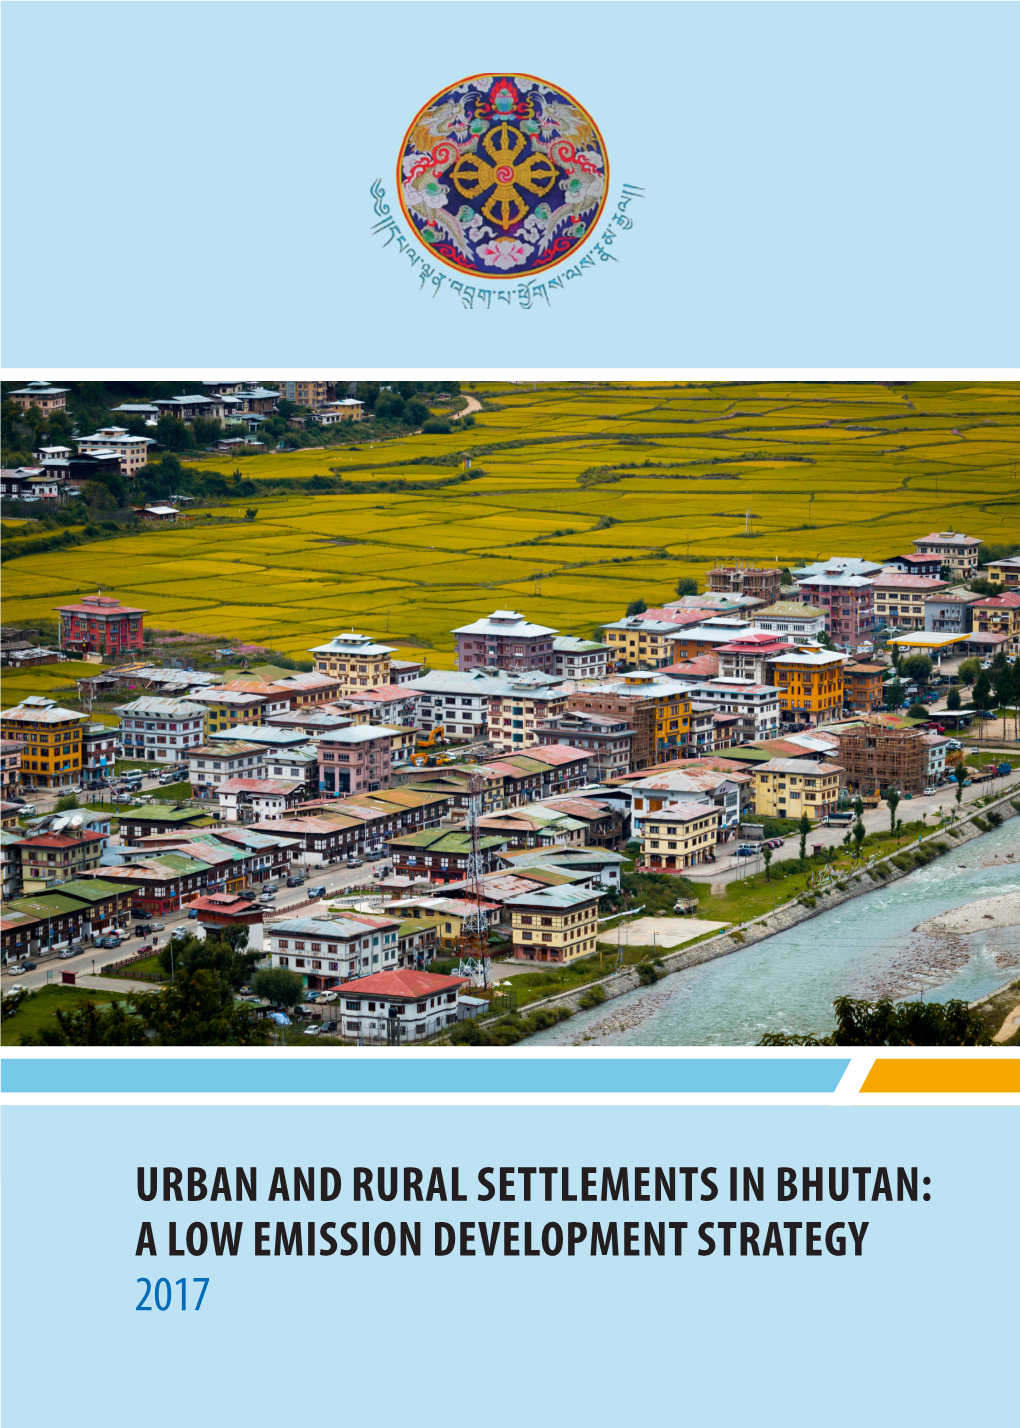 Urban and Rural Settlements in Bhutan: a Low Emission Development Strategy 2017